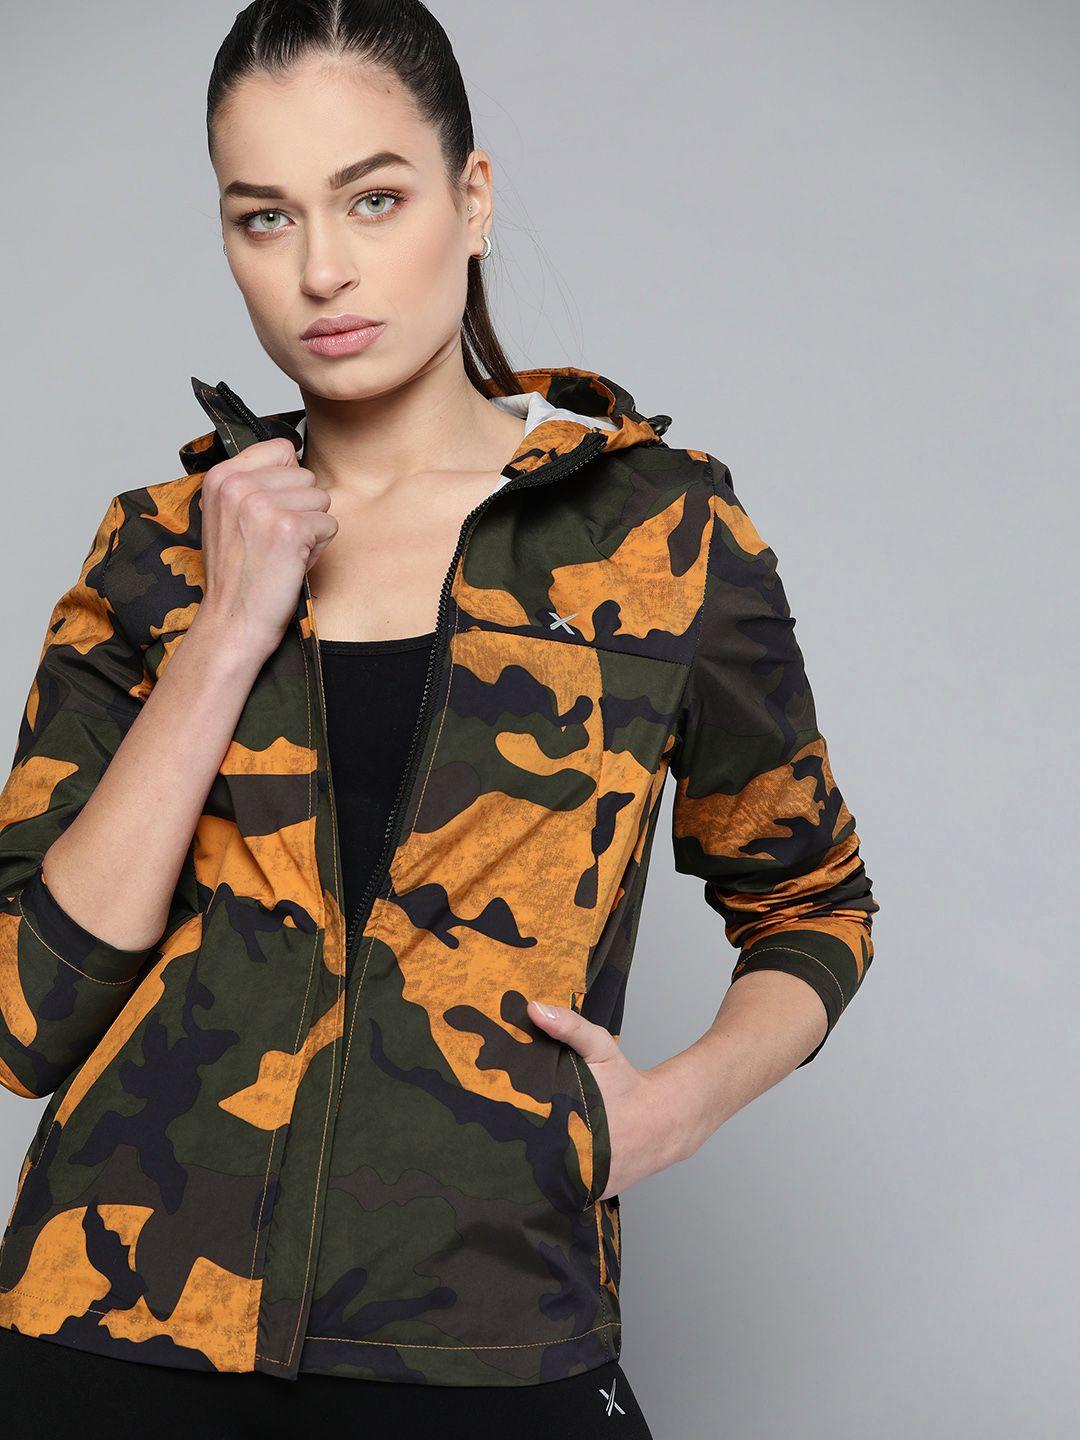 hrx by hrithik roshan outdoor women rapid-dry camouflage jacket